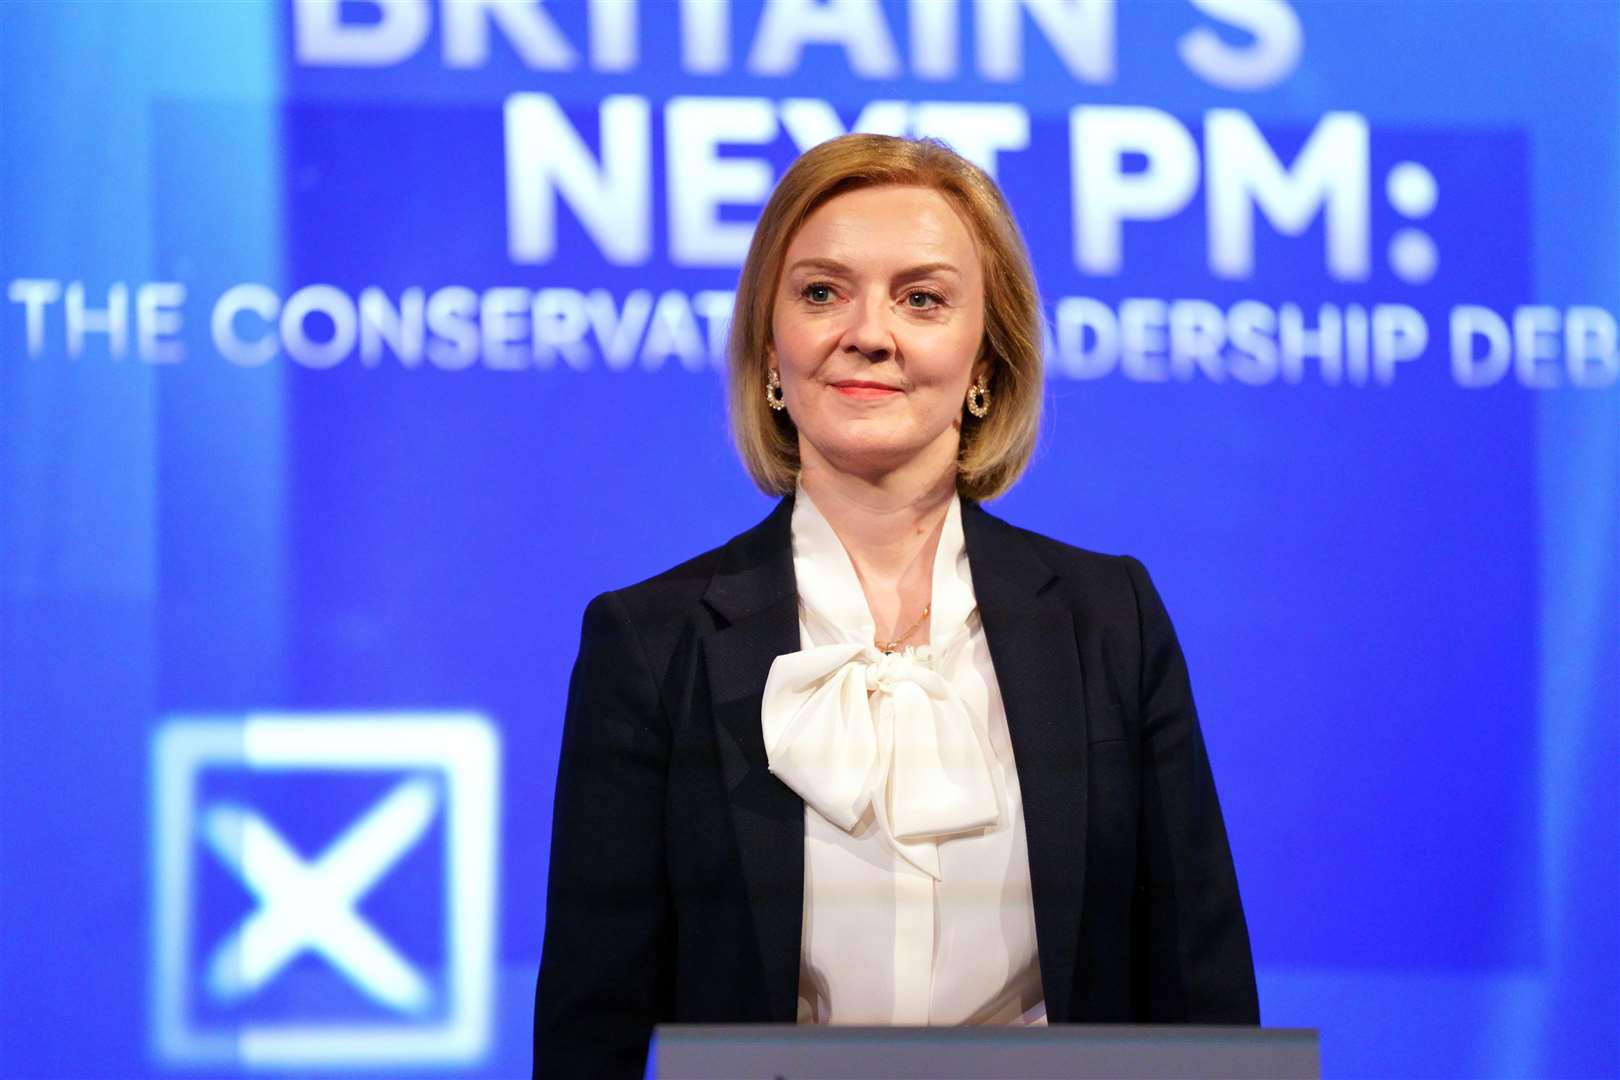 Liz Truss said the number one priority should be more economic growth (Victoria Jones/PA)